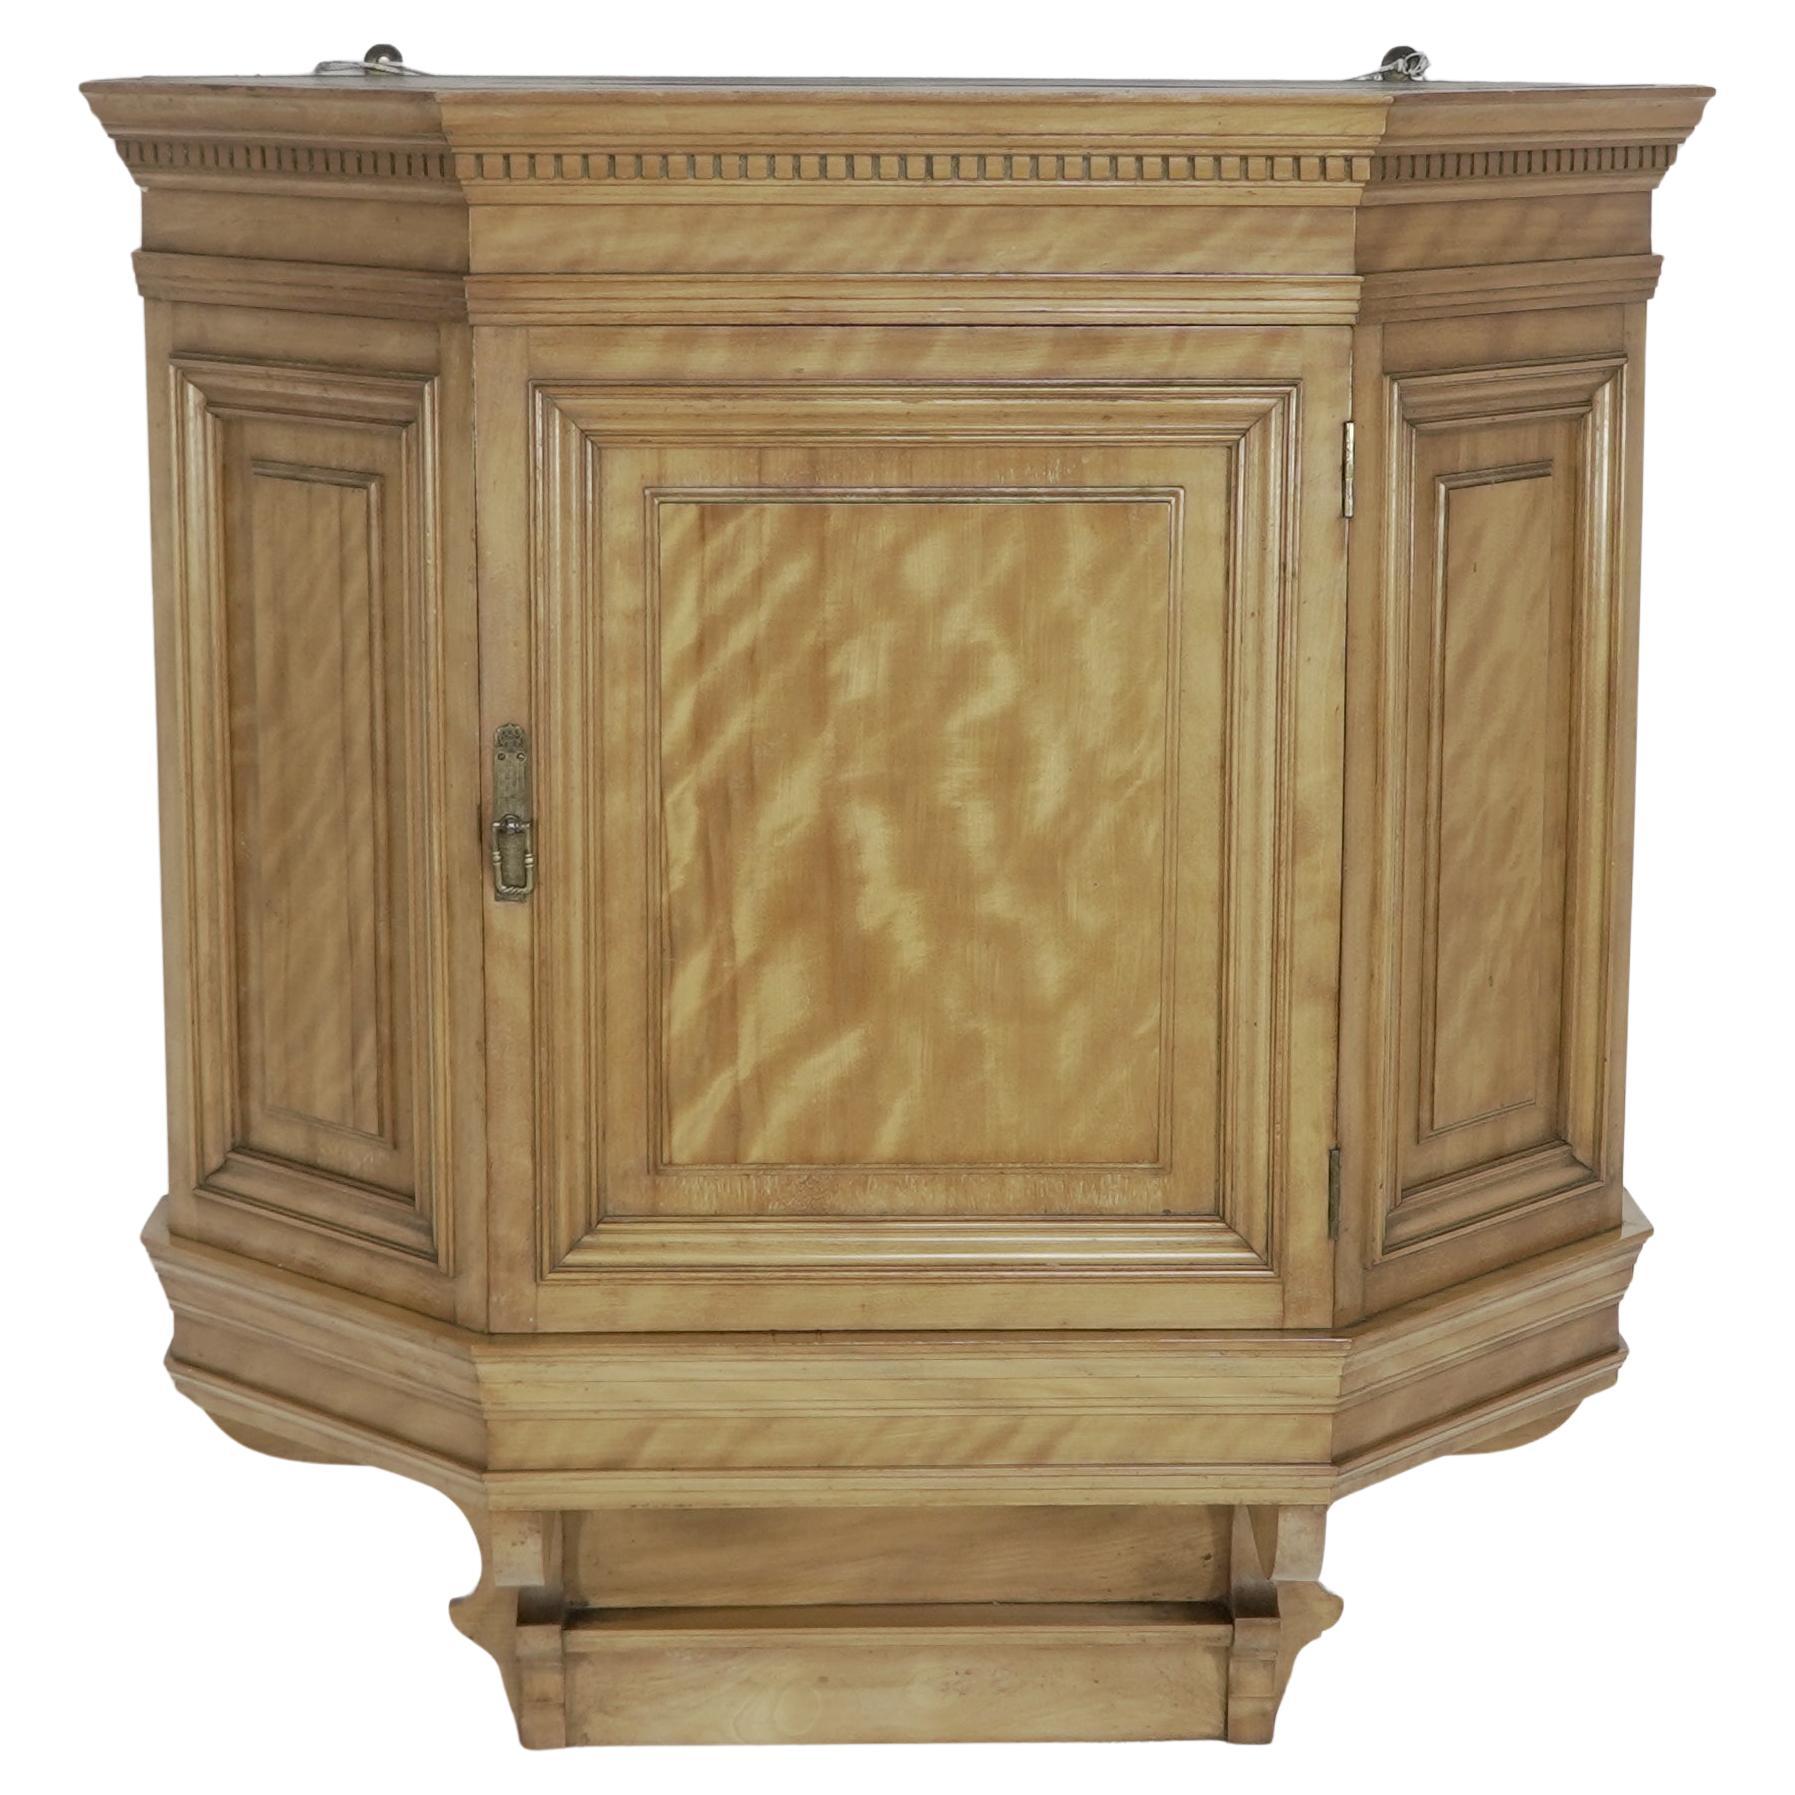 Collinson and Lock. An Aesthetic Movement Satin walnut breakfront wall cupboard